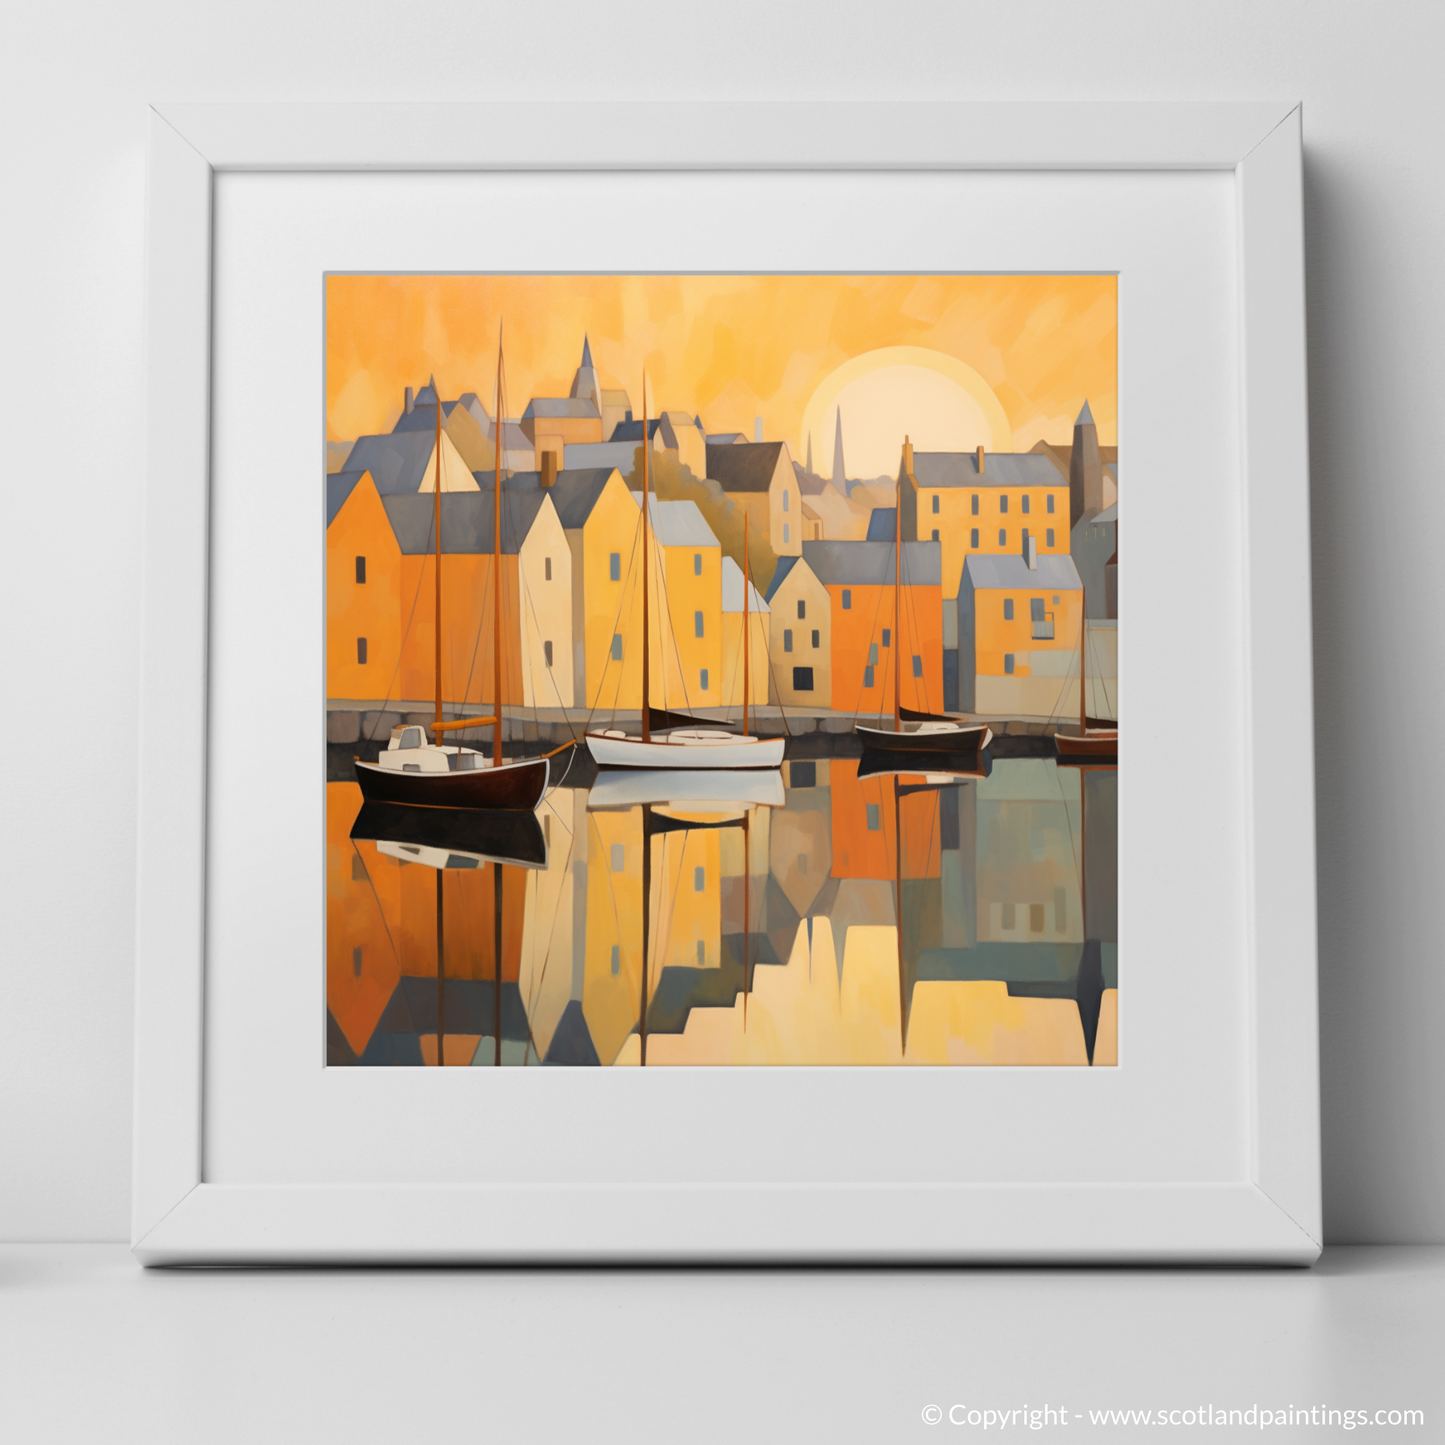 Tobermory Harbour at Twilight: A Minimalist Tribute